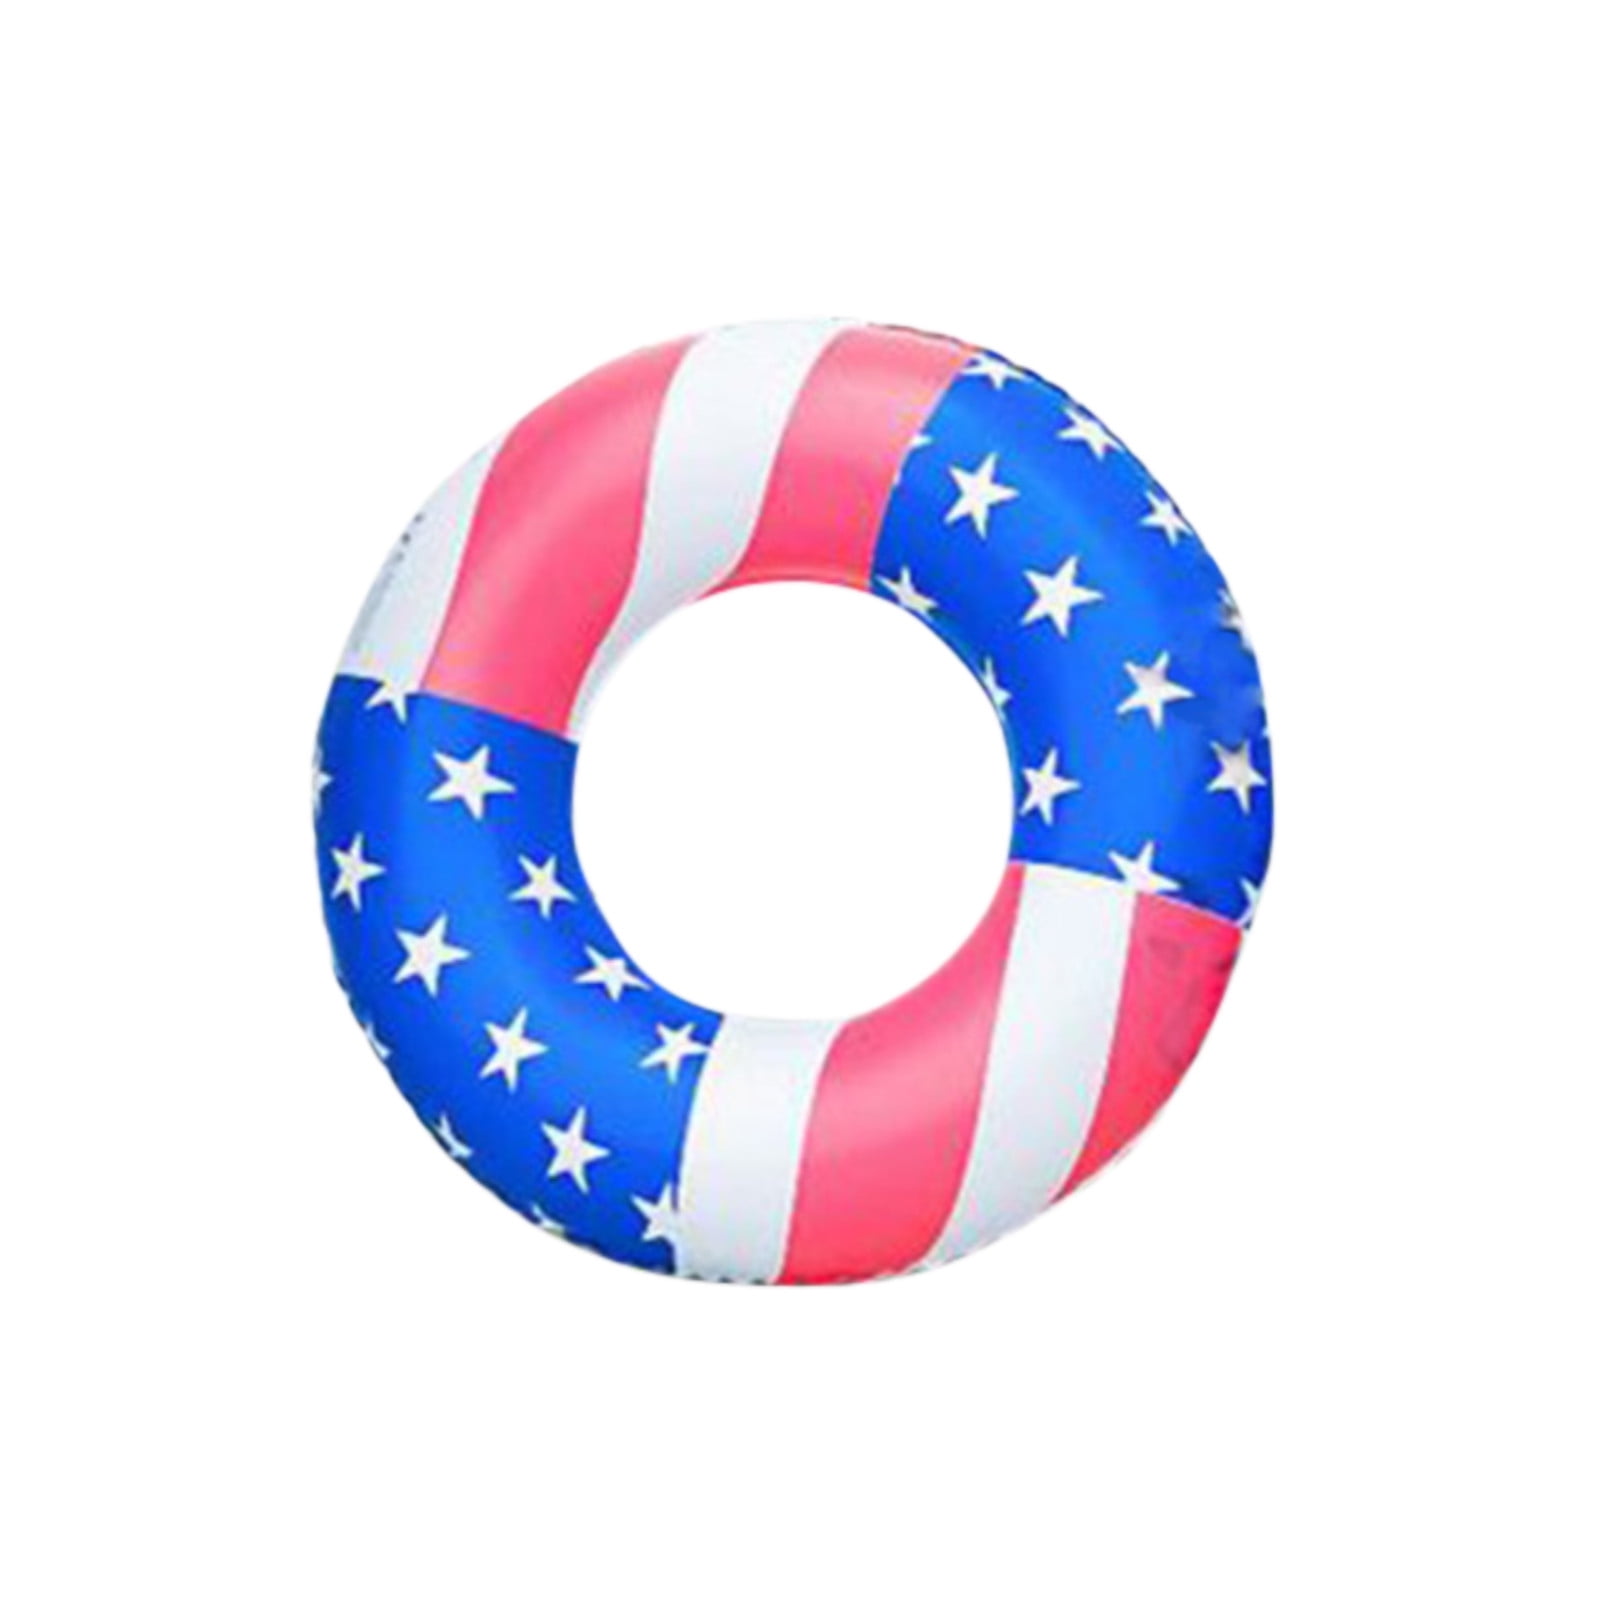 Details about    Life Ring Decor White & Blue Canvas Hanging Ornament Home Pool & Lake BEACH SEA 